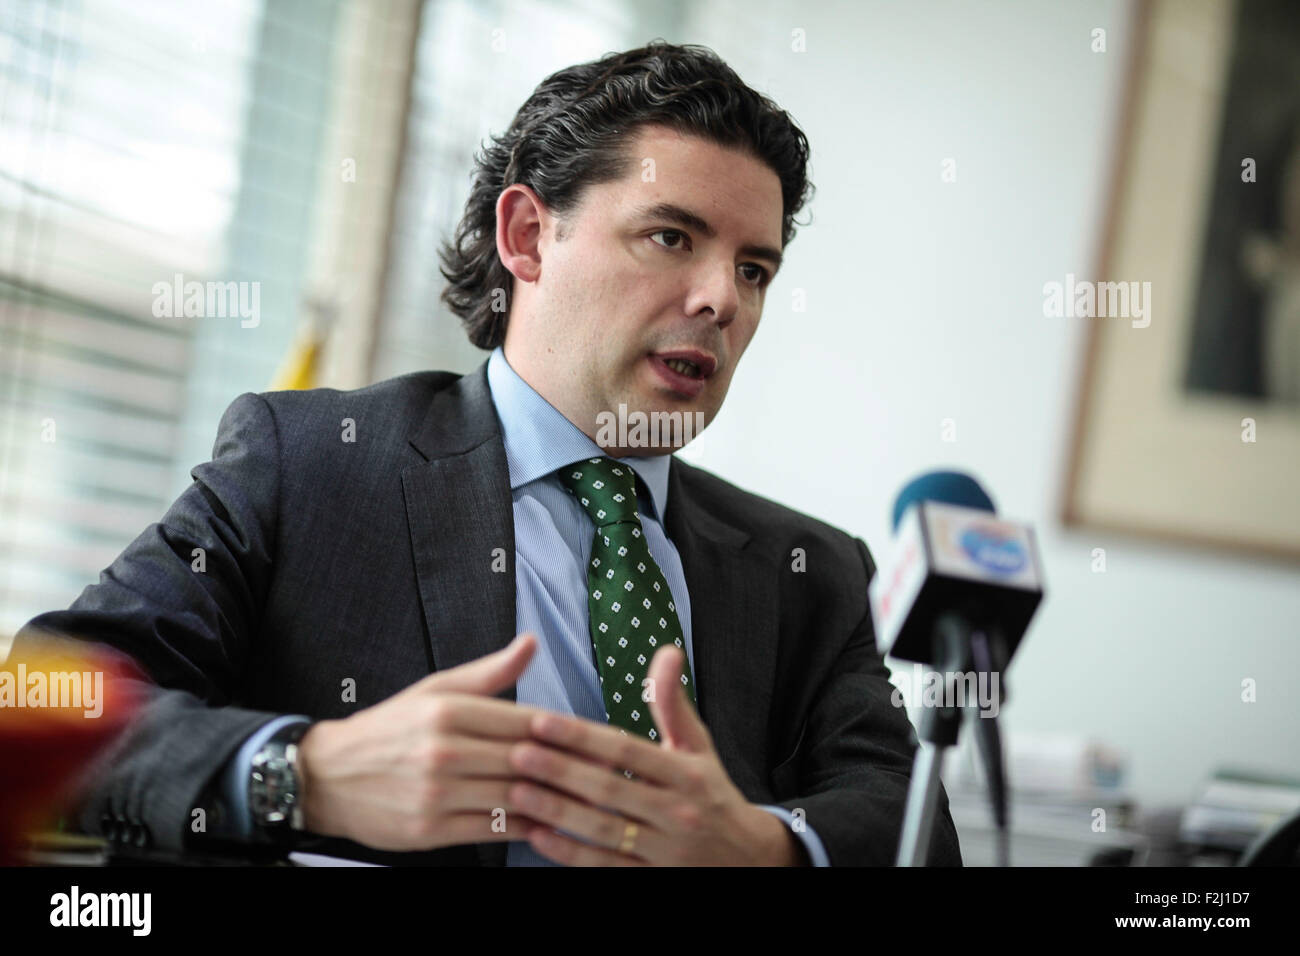 (150920) -- BOGOTA, Sept. 20, 2015 (Xinhua) -- Photo taken on Sept. 17, 2015 shows Colombian deputy Defense Minister for International Politics and Affairs Anibal Fernandez de Soto receiving an interview with Xinhua News Agency in Bogota city, capital of Colombia. Colombian Government began to take measures against the increase in several regions of the country of illegal mining, that is developed specially by the guerrillas and criminal bands that exploit the mineral resources of the country irregularly and are leaving severe damages to the environment. Anibal Fernandez de Soto explained that Stock Photo